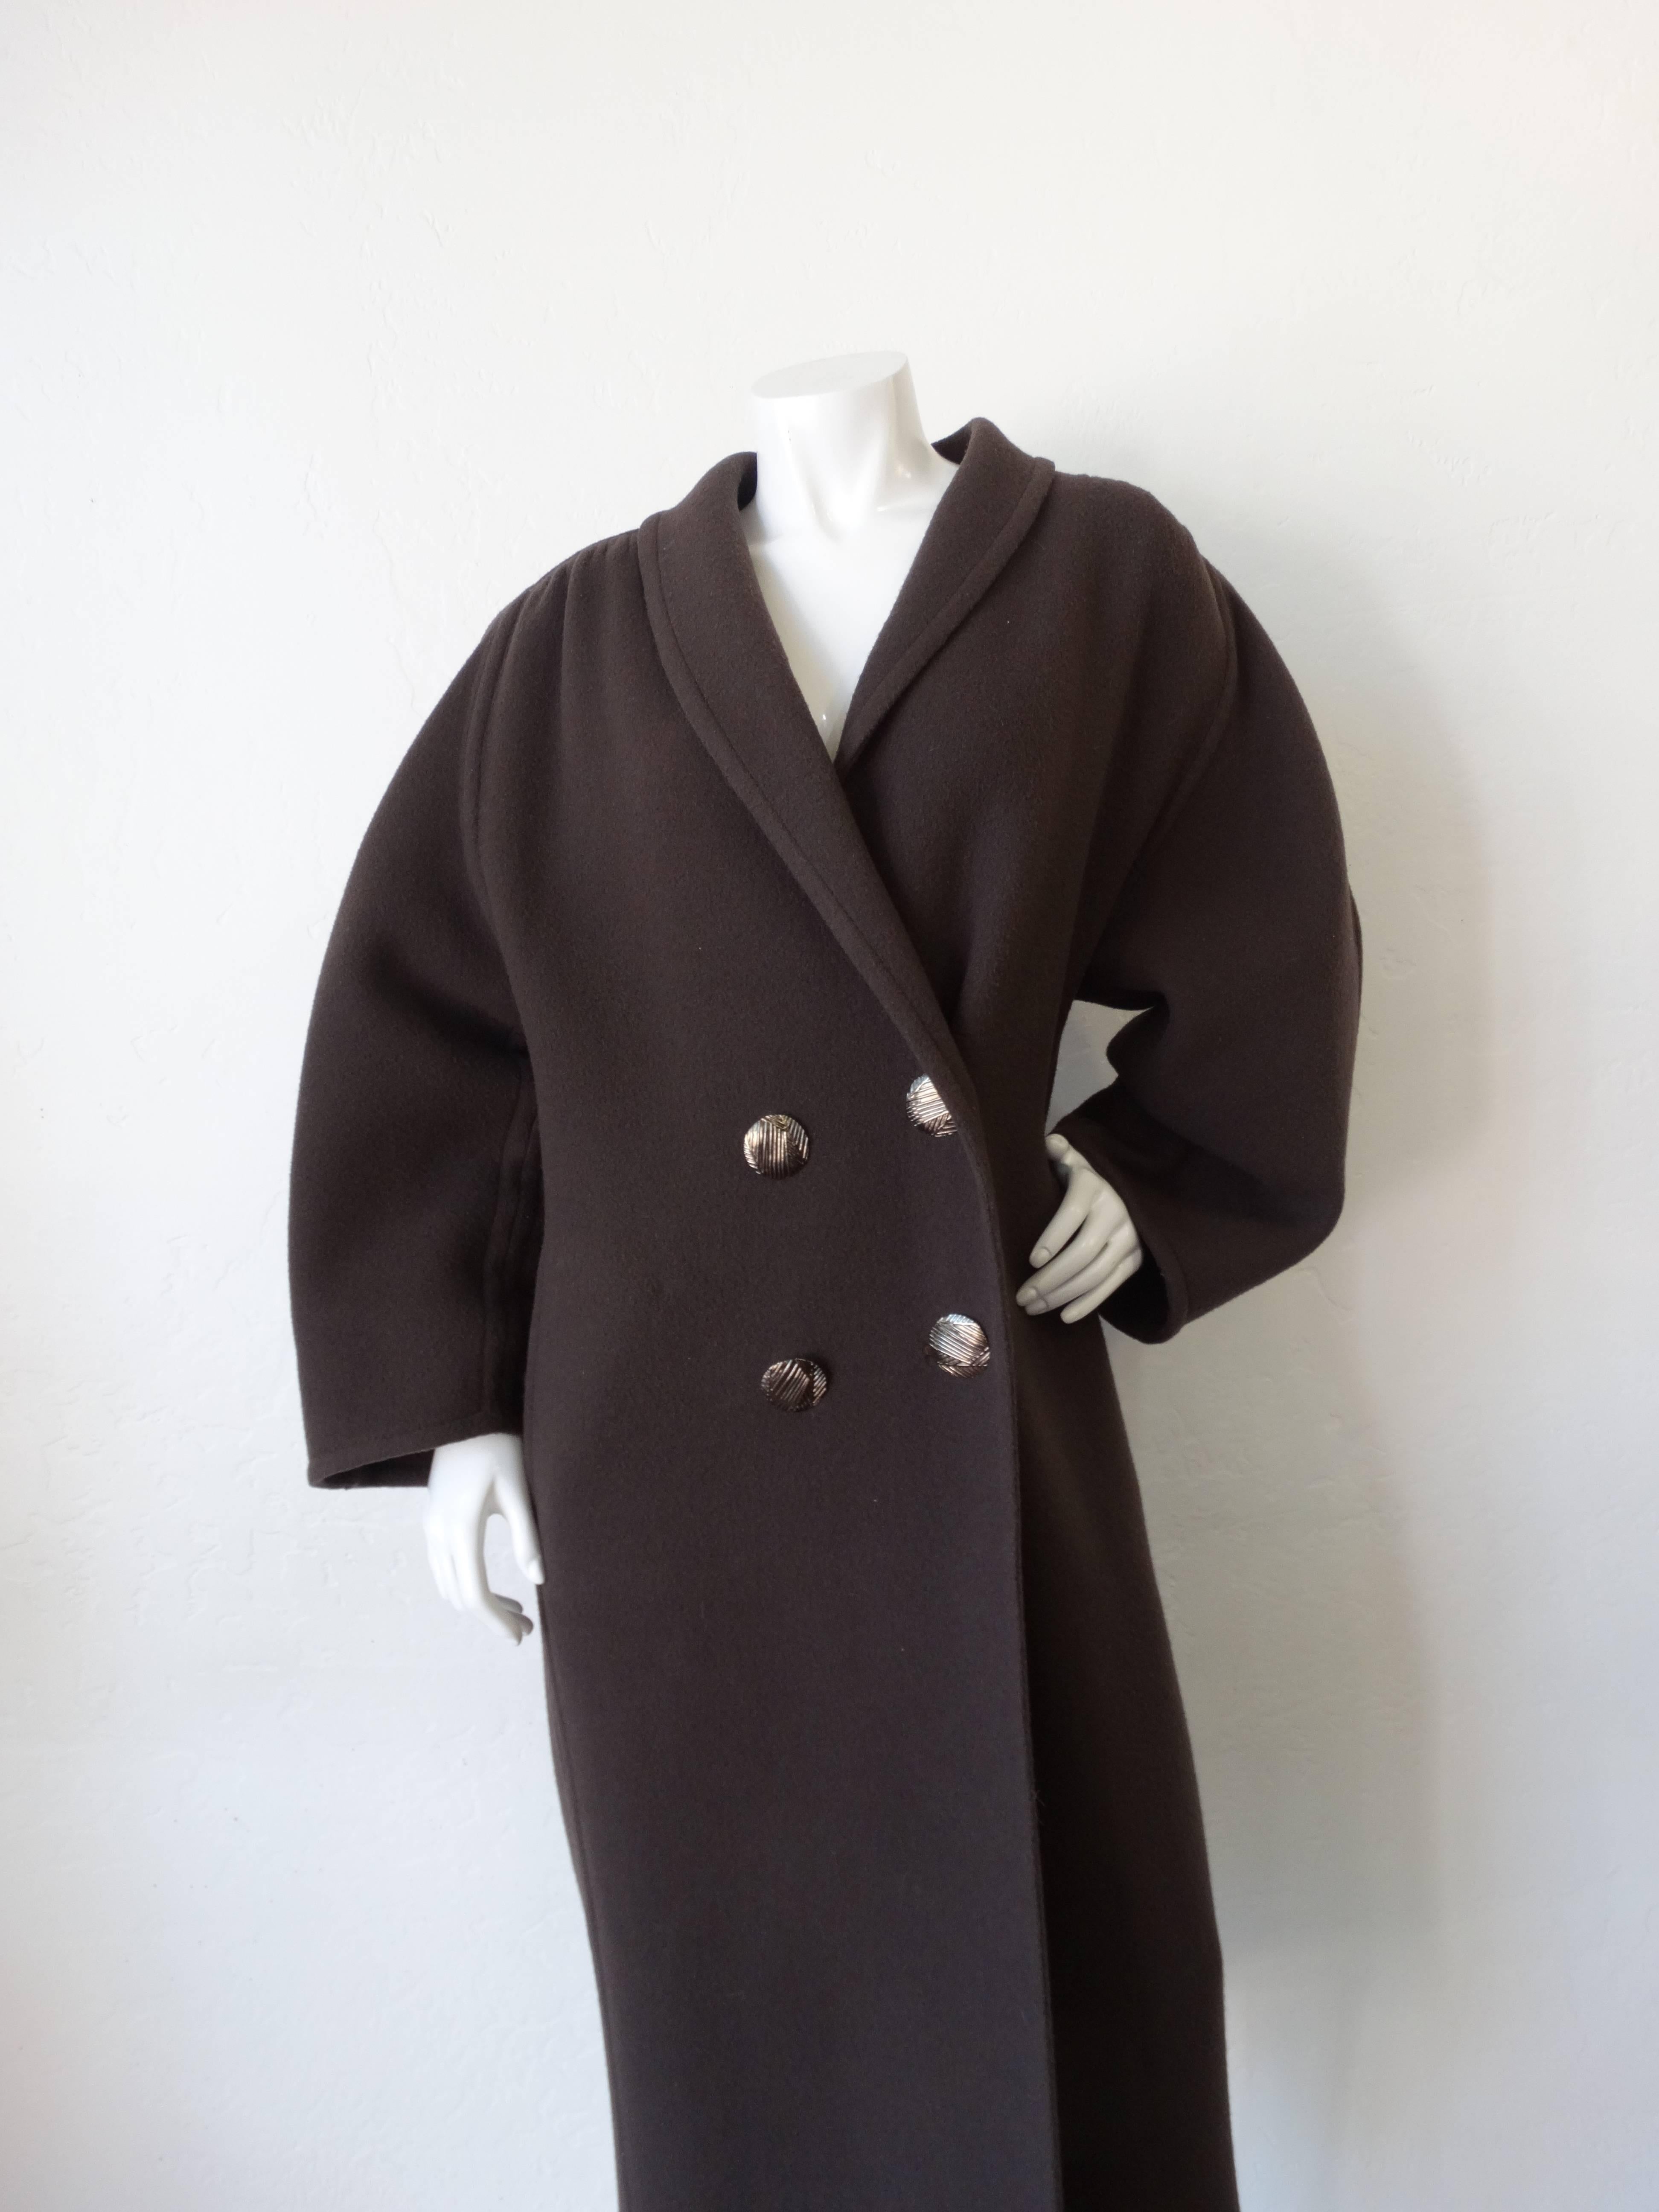 We are obsessing over this incredible 1980s Galanos coat! Super chic oversized silhouette with shapely sleeves and detailed back. Made of a super soft wooly blend fabric in a cool dark grey color. Double breasted construction, fastens with four